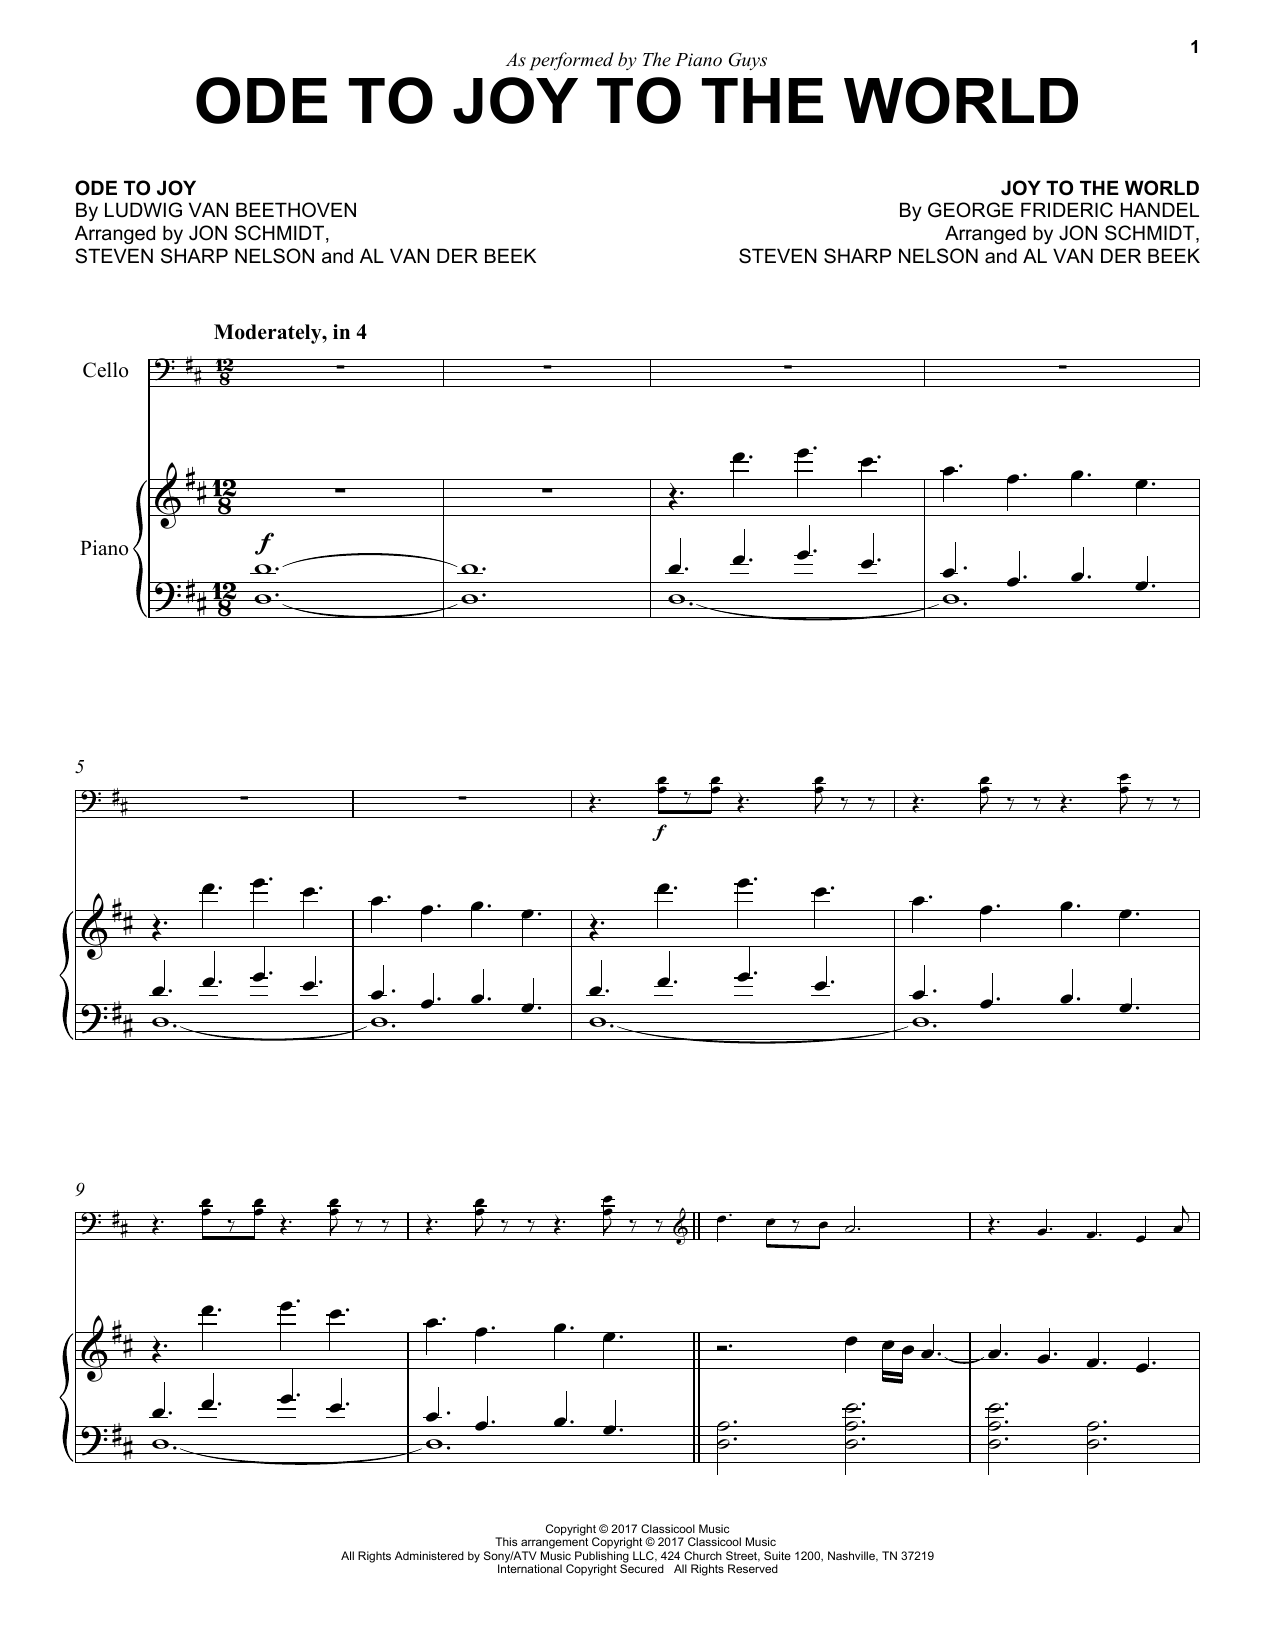 Download The Piano Guys Ode To Joy to the World Sheet Music